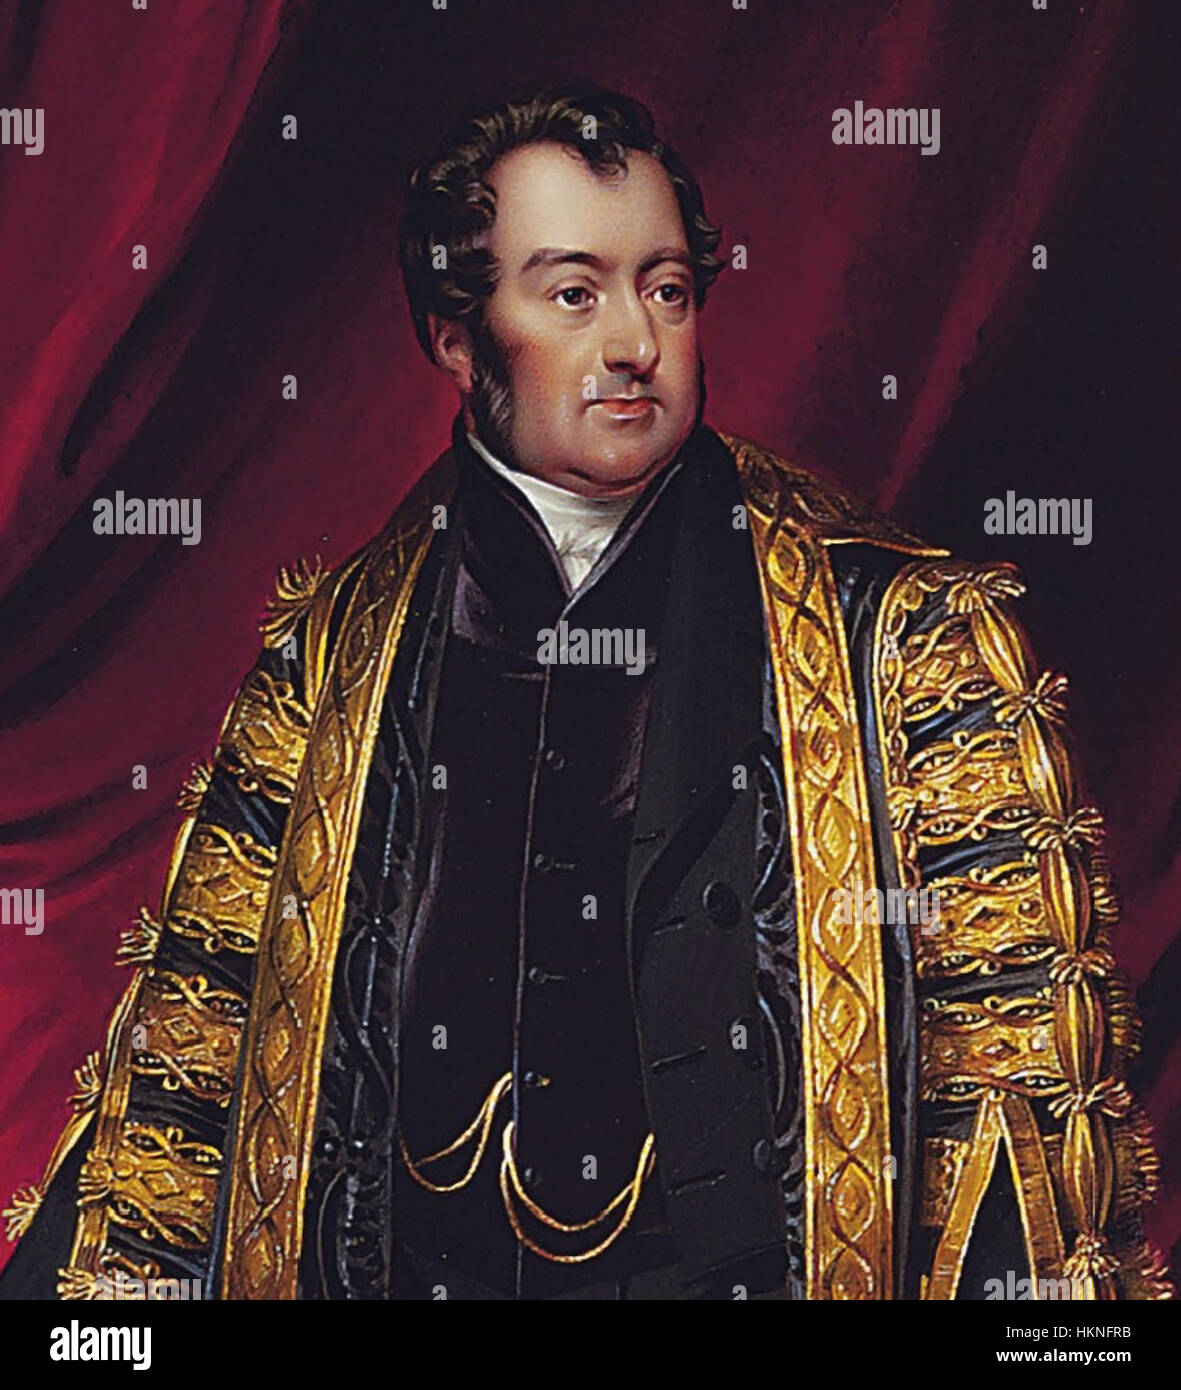 JC Spencer, Viscount Althorp by HP Bone cropped Stock Photo